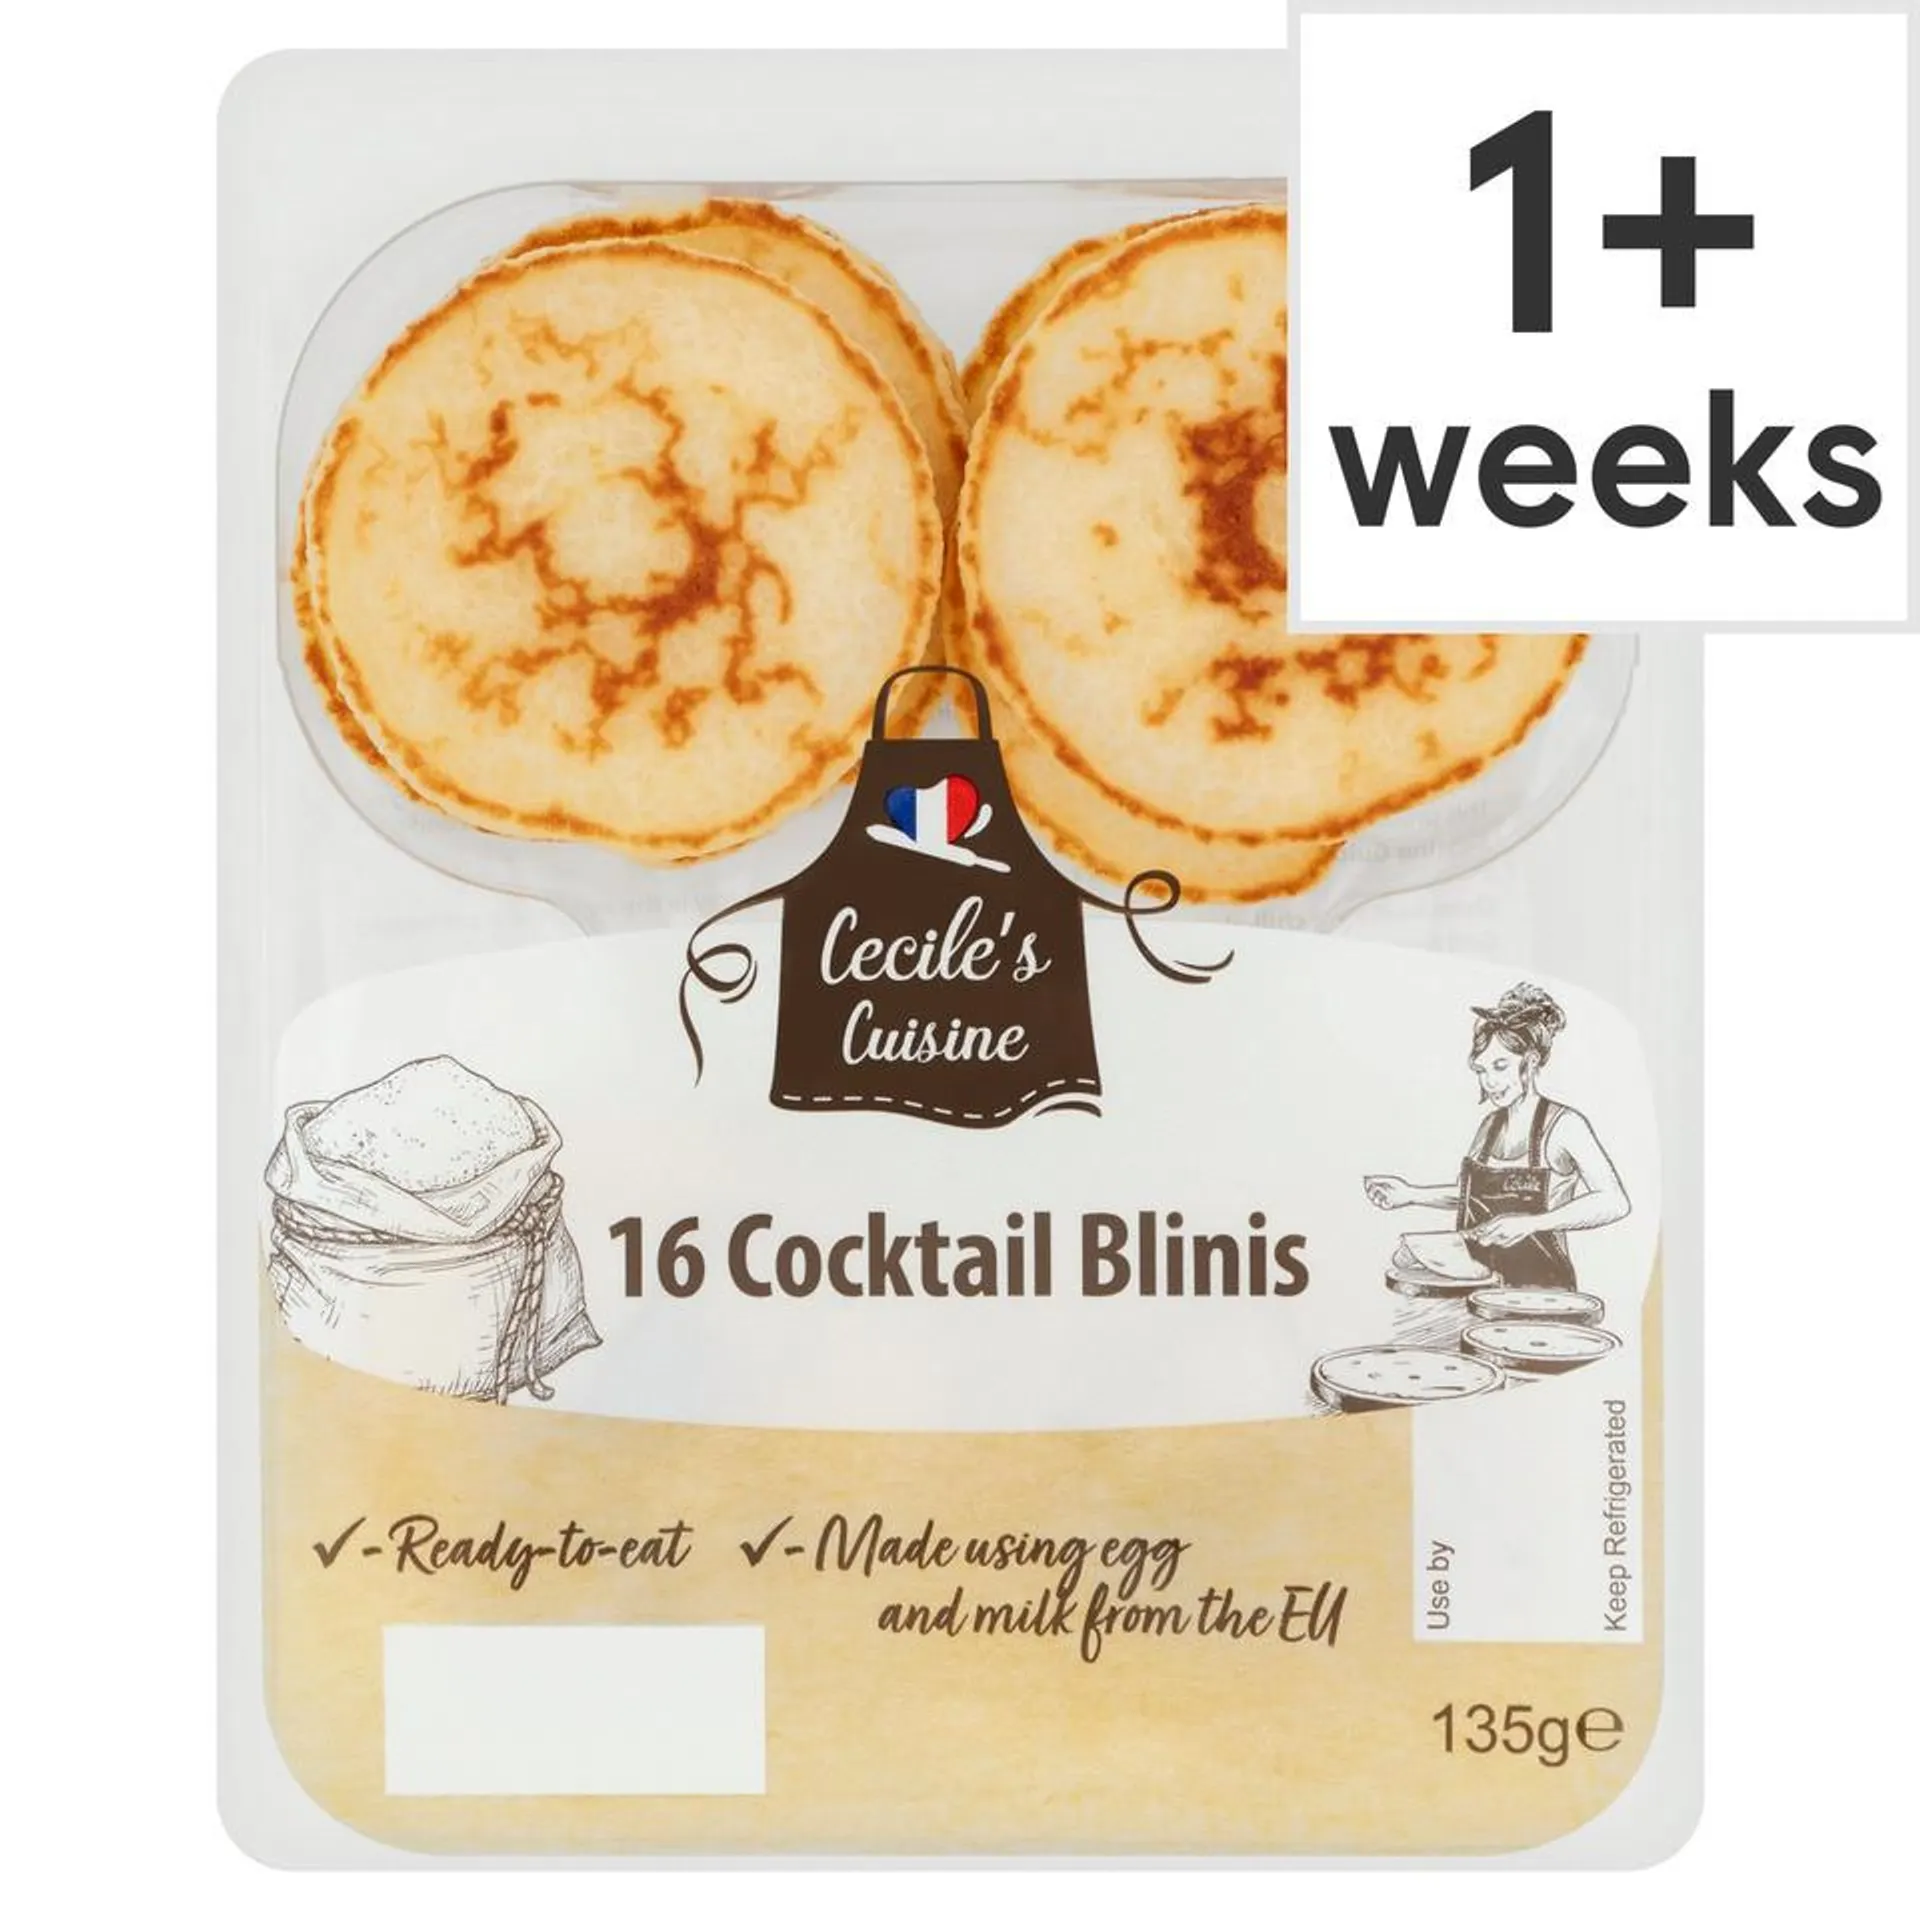 Cecile's Cuisine 16 Cocktail Blinis 135G